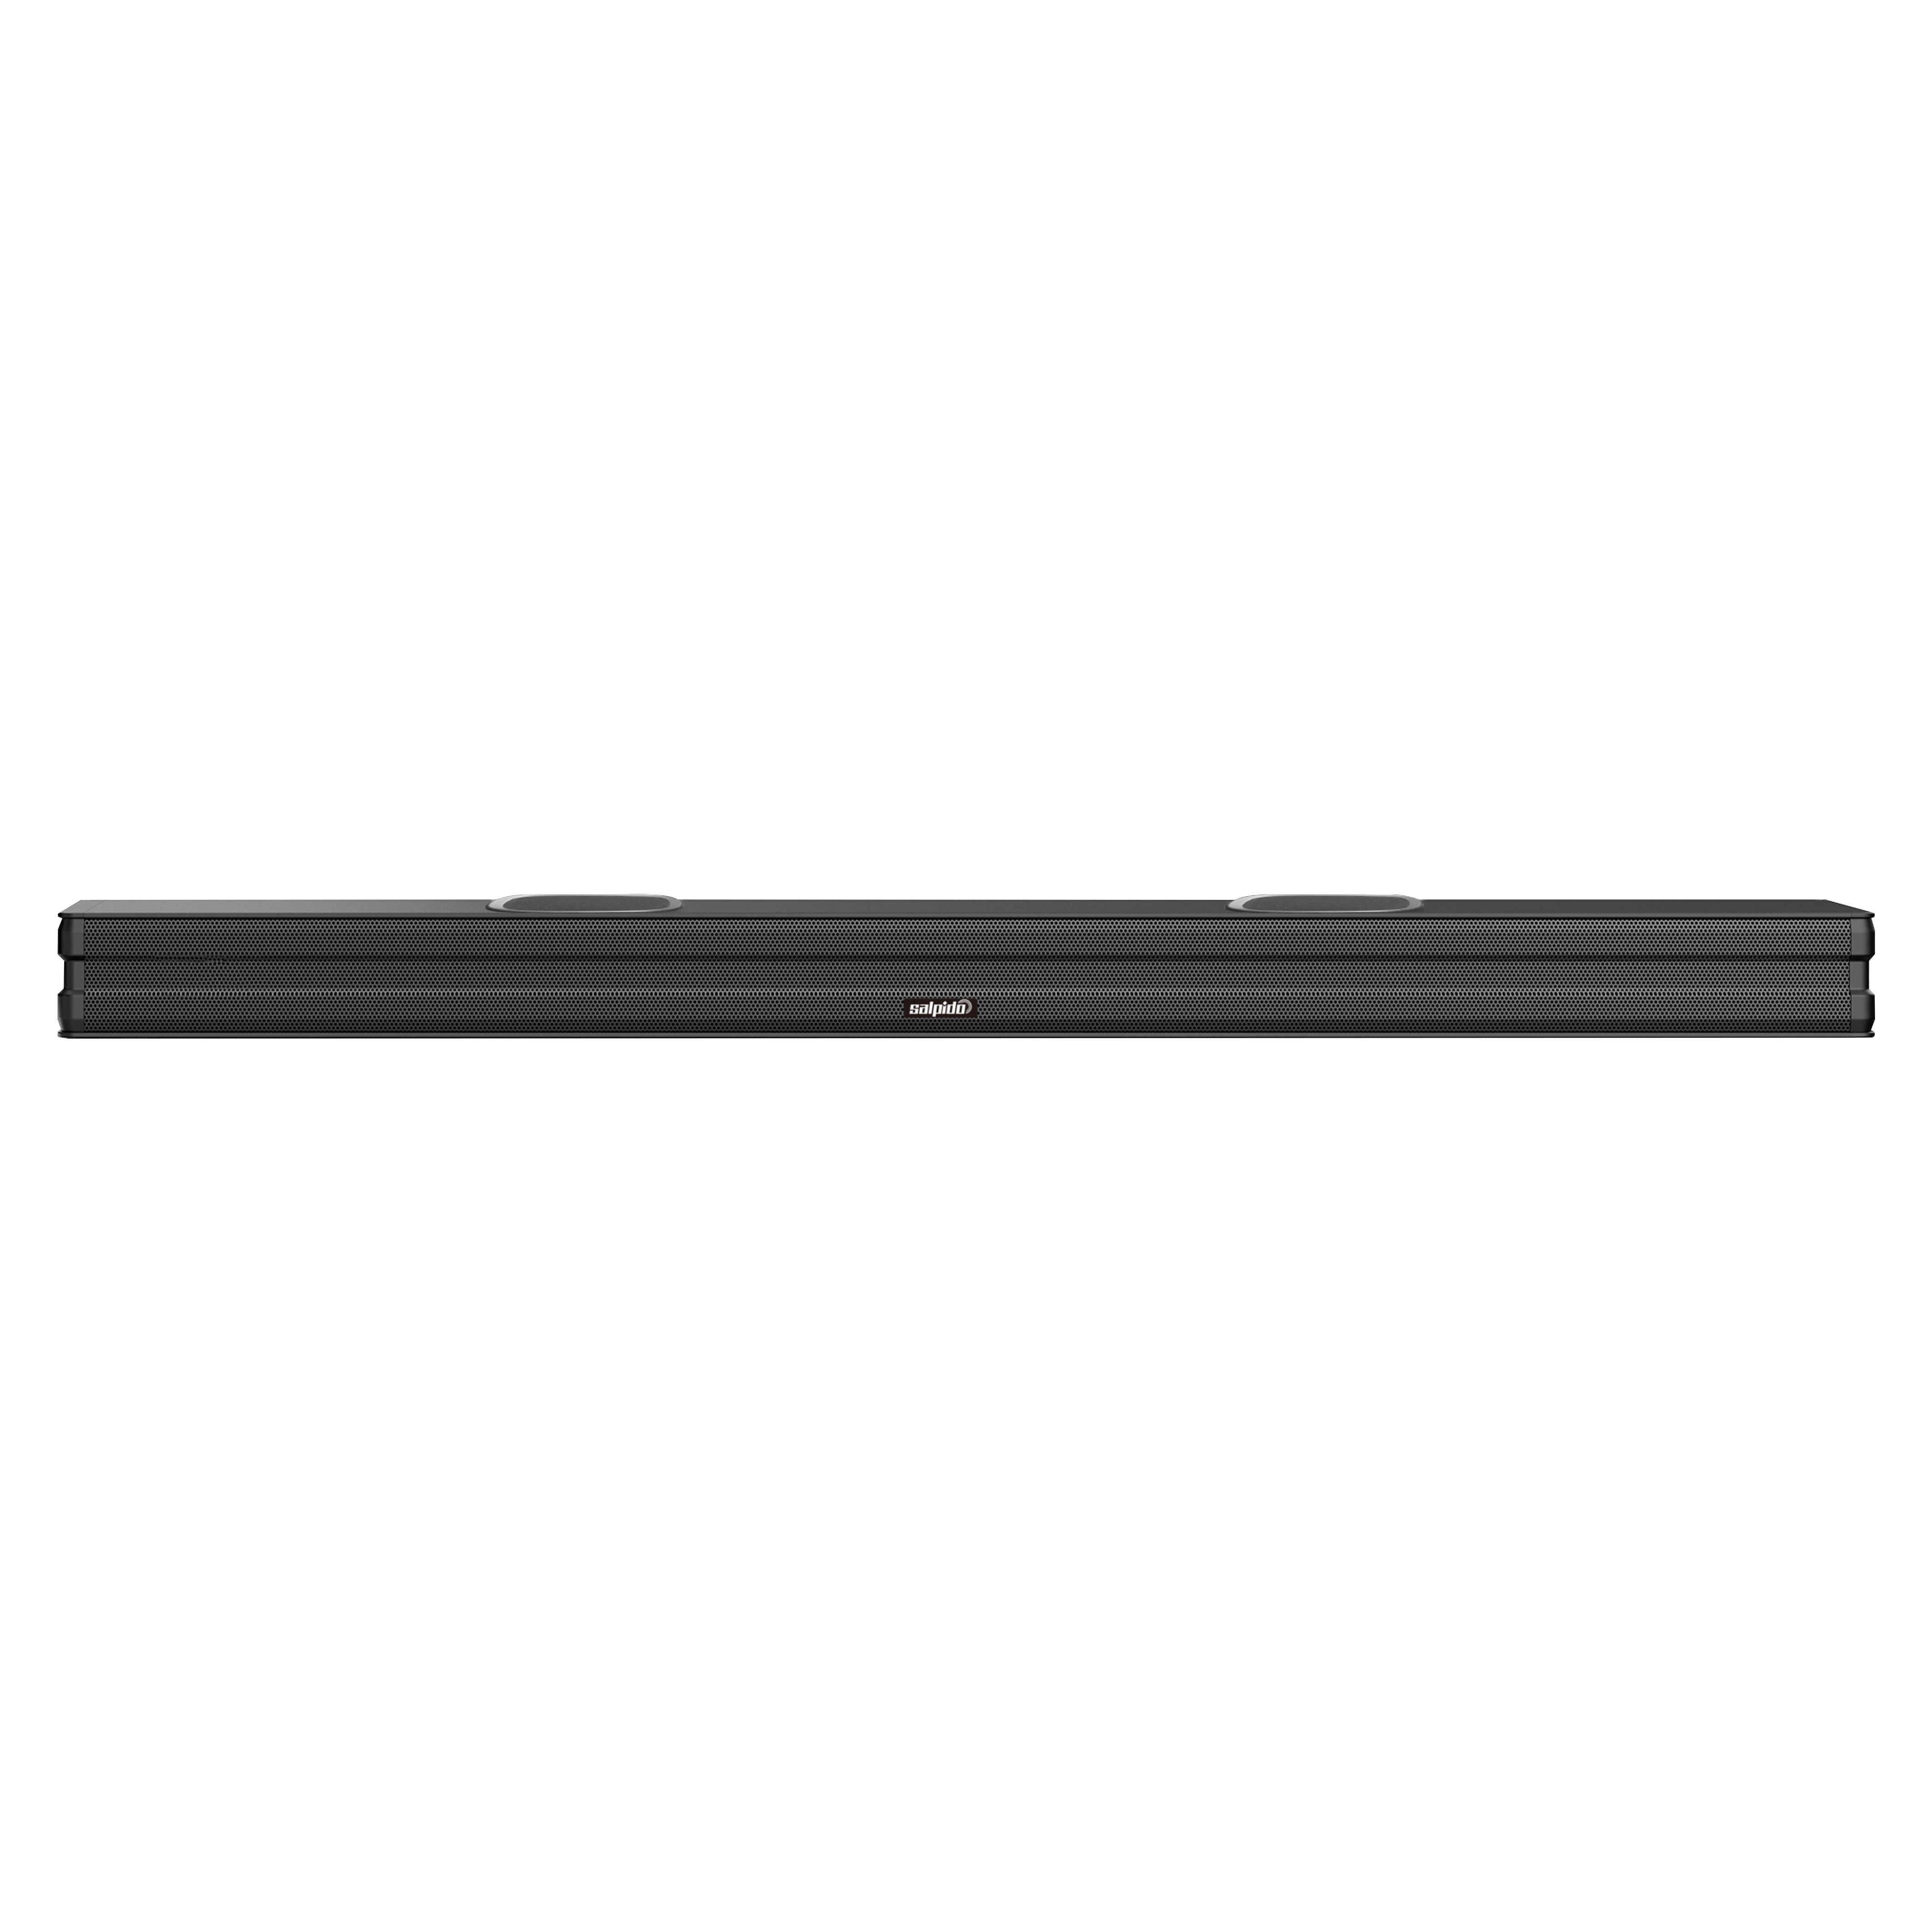 Sonic waves 750 , 2.2Ch soundbar with subwoofer